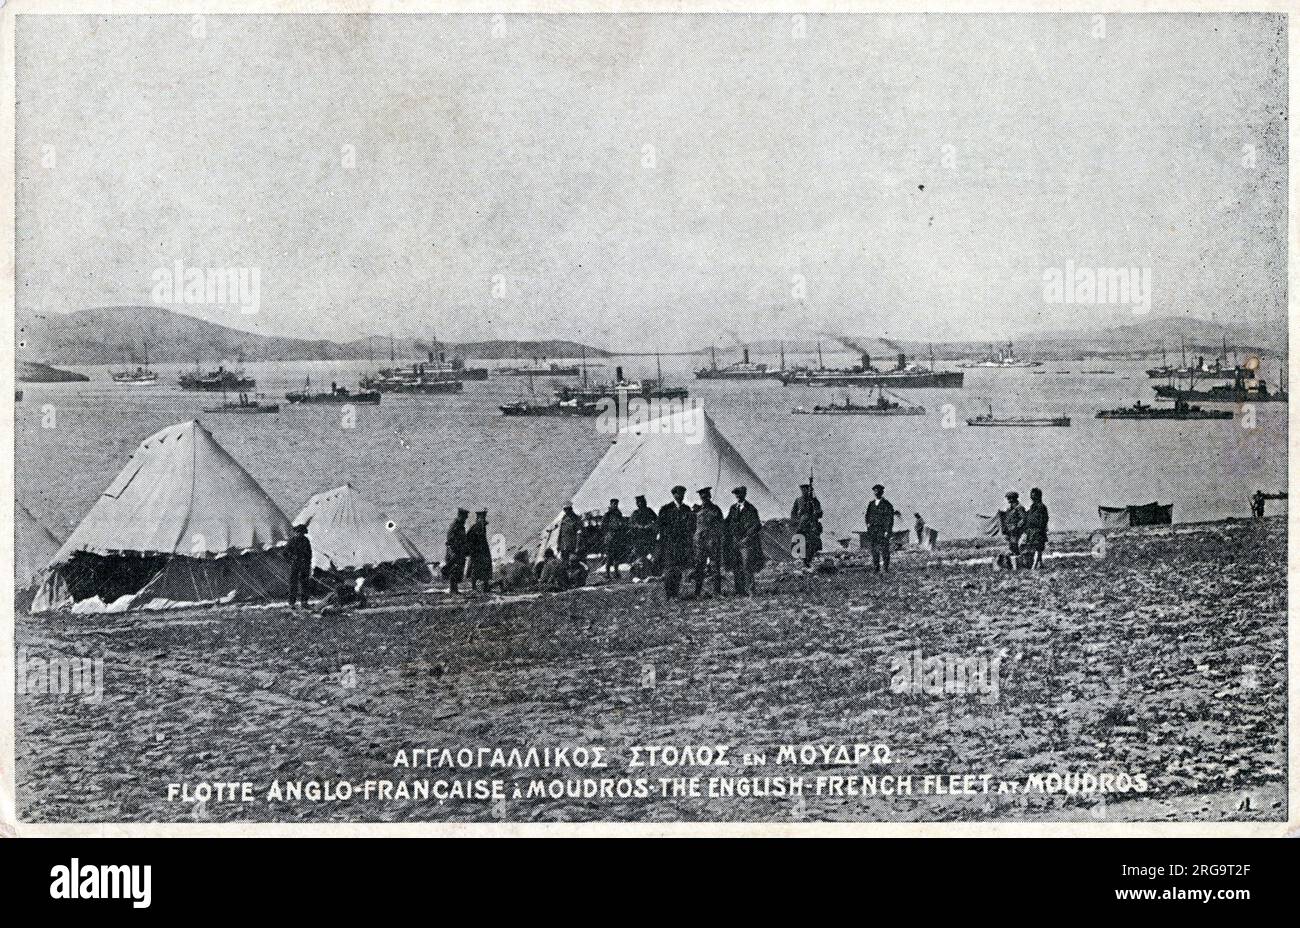 WW1 - The Anglo-French fleet at Lemnos Island, Moudros, Greece. Moudros was used as an Allied Base during the Dardanelles Campaign during the First World War. Stock Photo